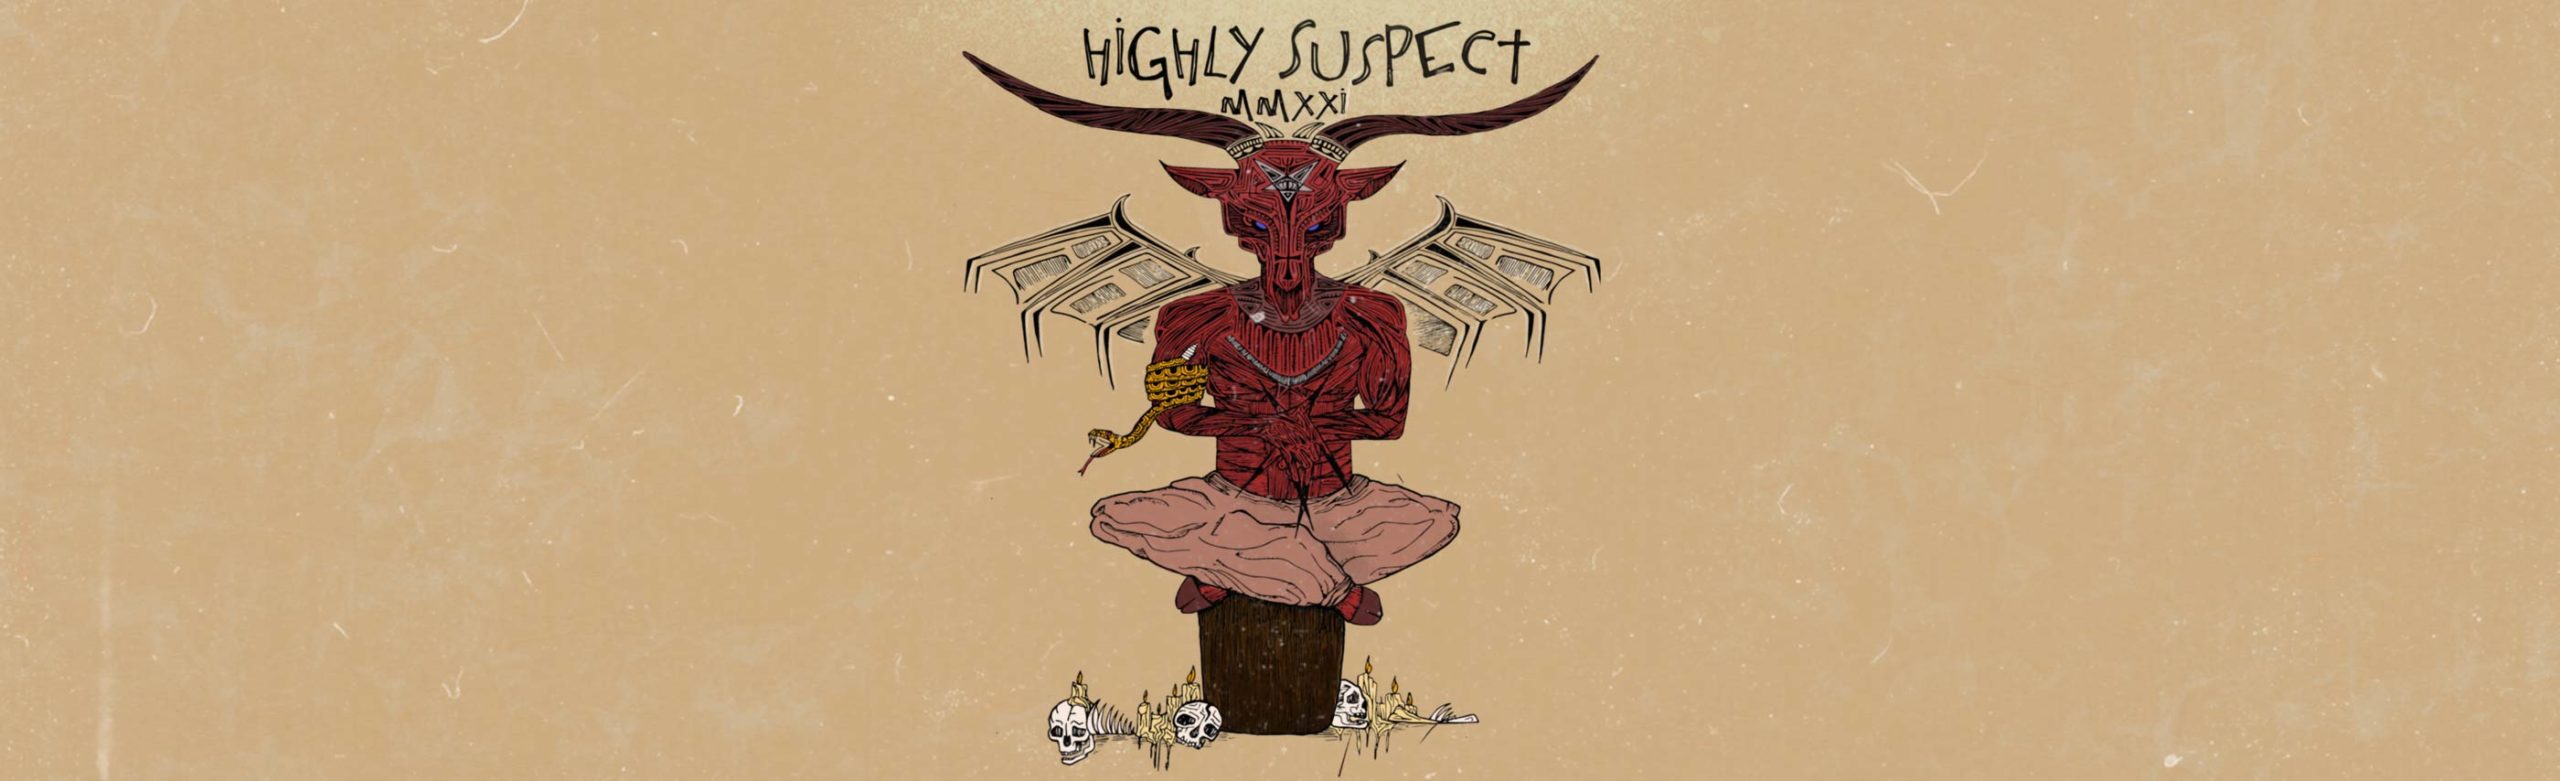 Event Info: Highly Suspect at The ELM 2021 Image